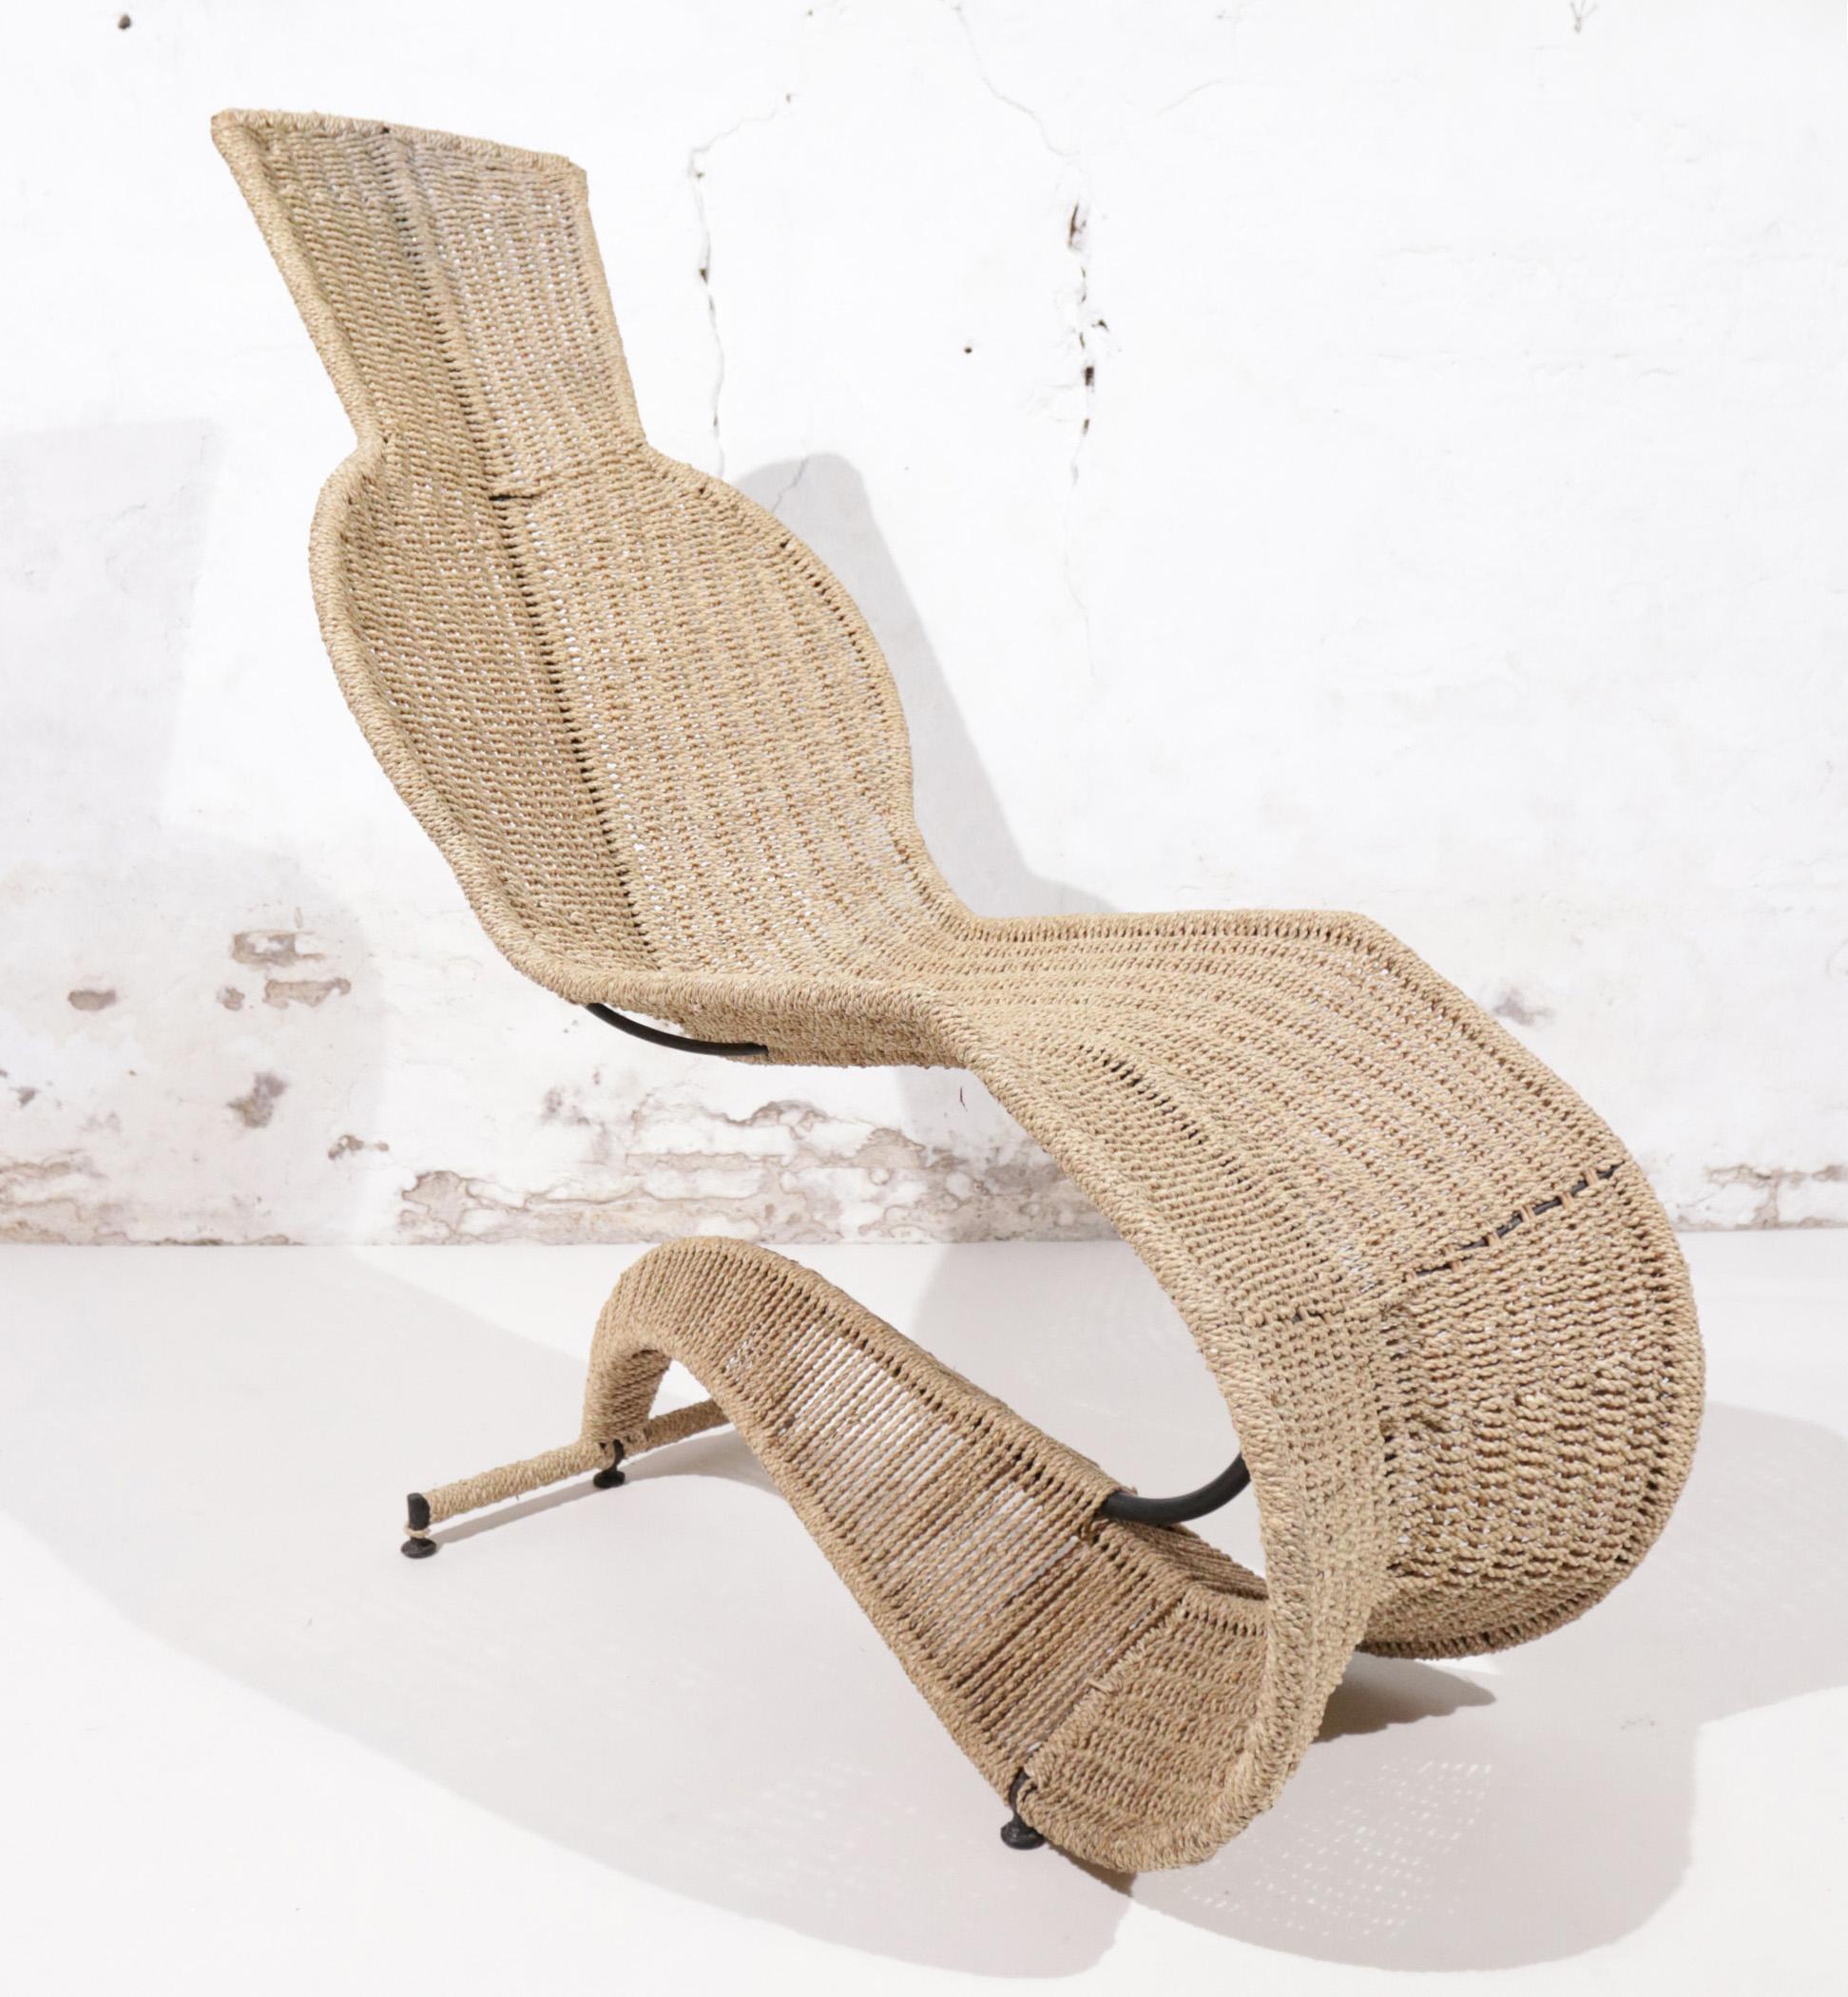 One of the most special chairs we have ever had is this one designed by Tom Dixon.
A steel frame as a skeleton and woven seagrass as a skin make it a true sculpture.
Not only does it look cool, it's also very comfortable.
It is a kind of rocking